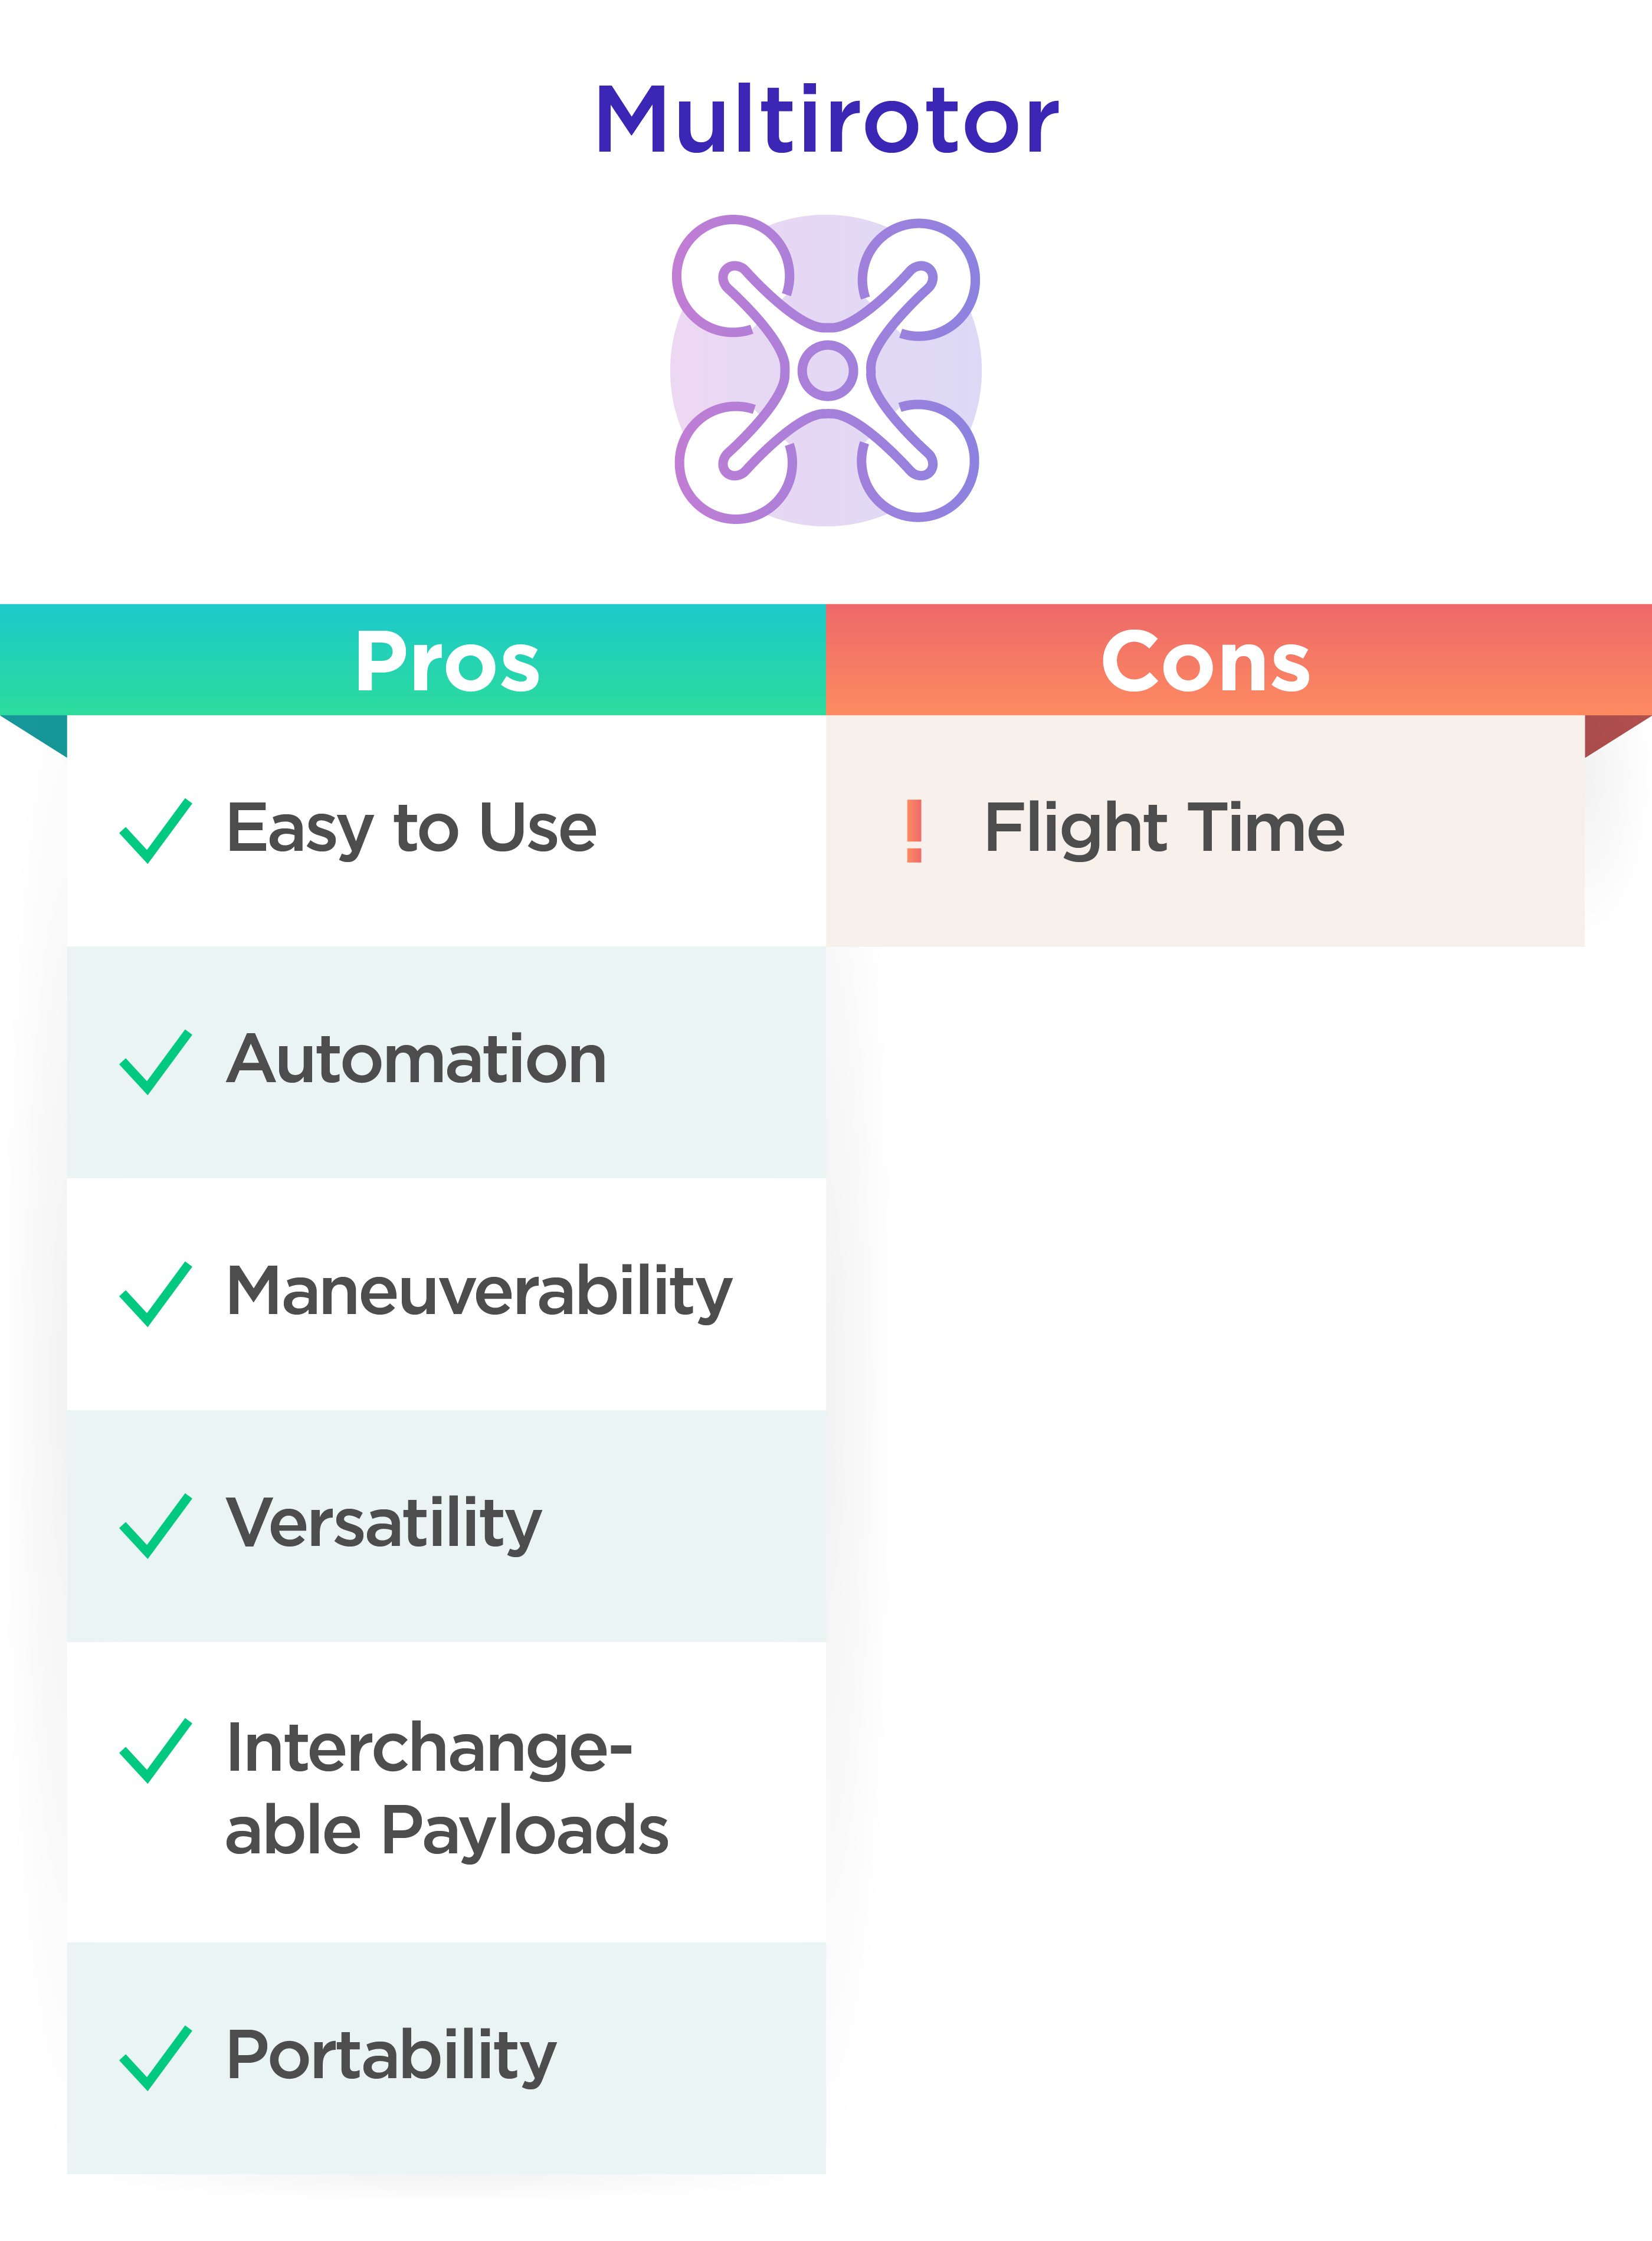 Multirotor Pros and Cons